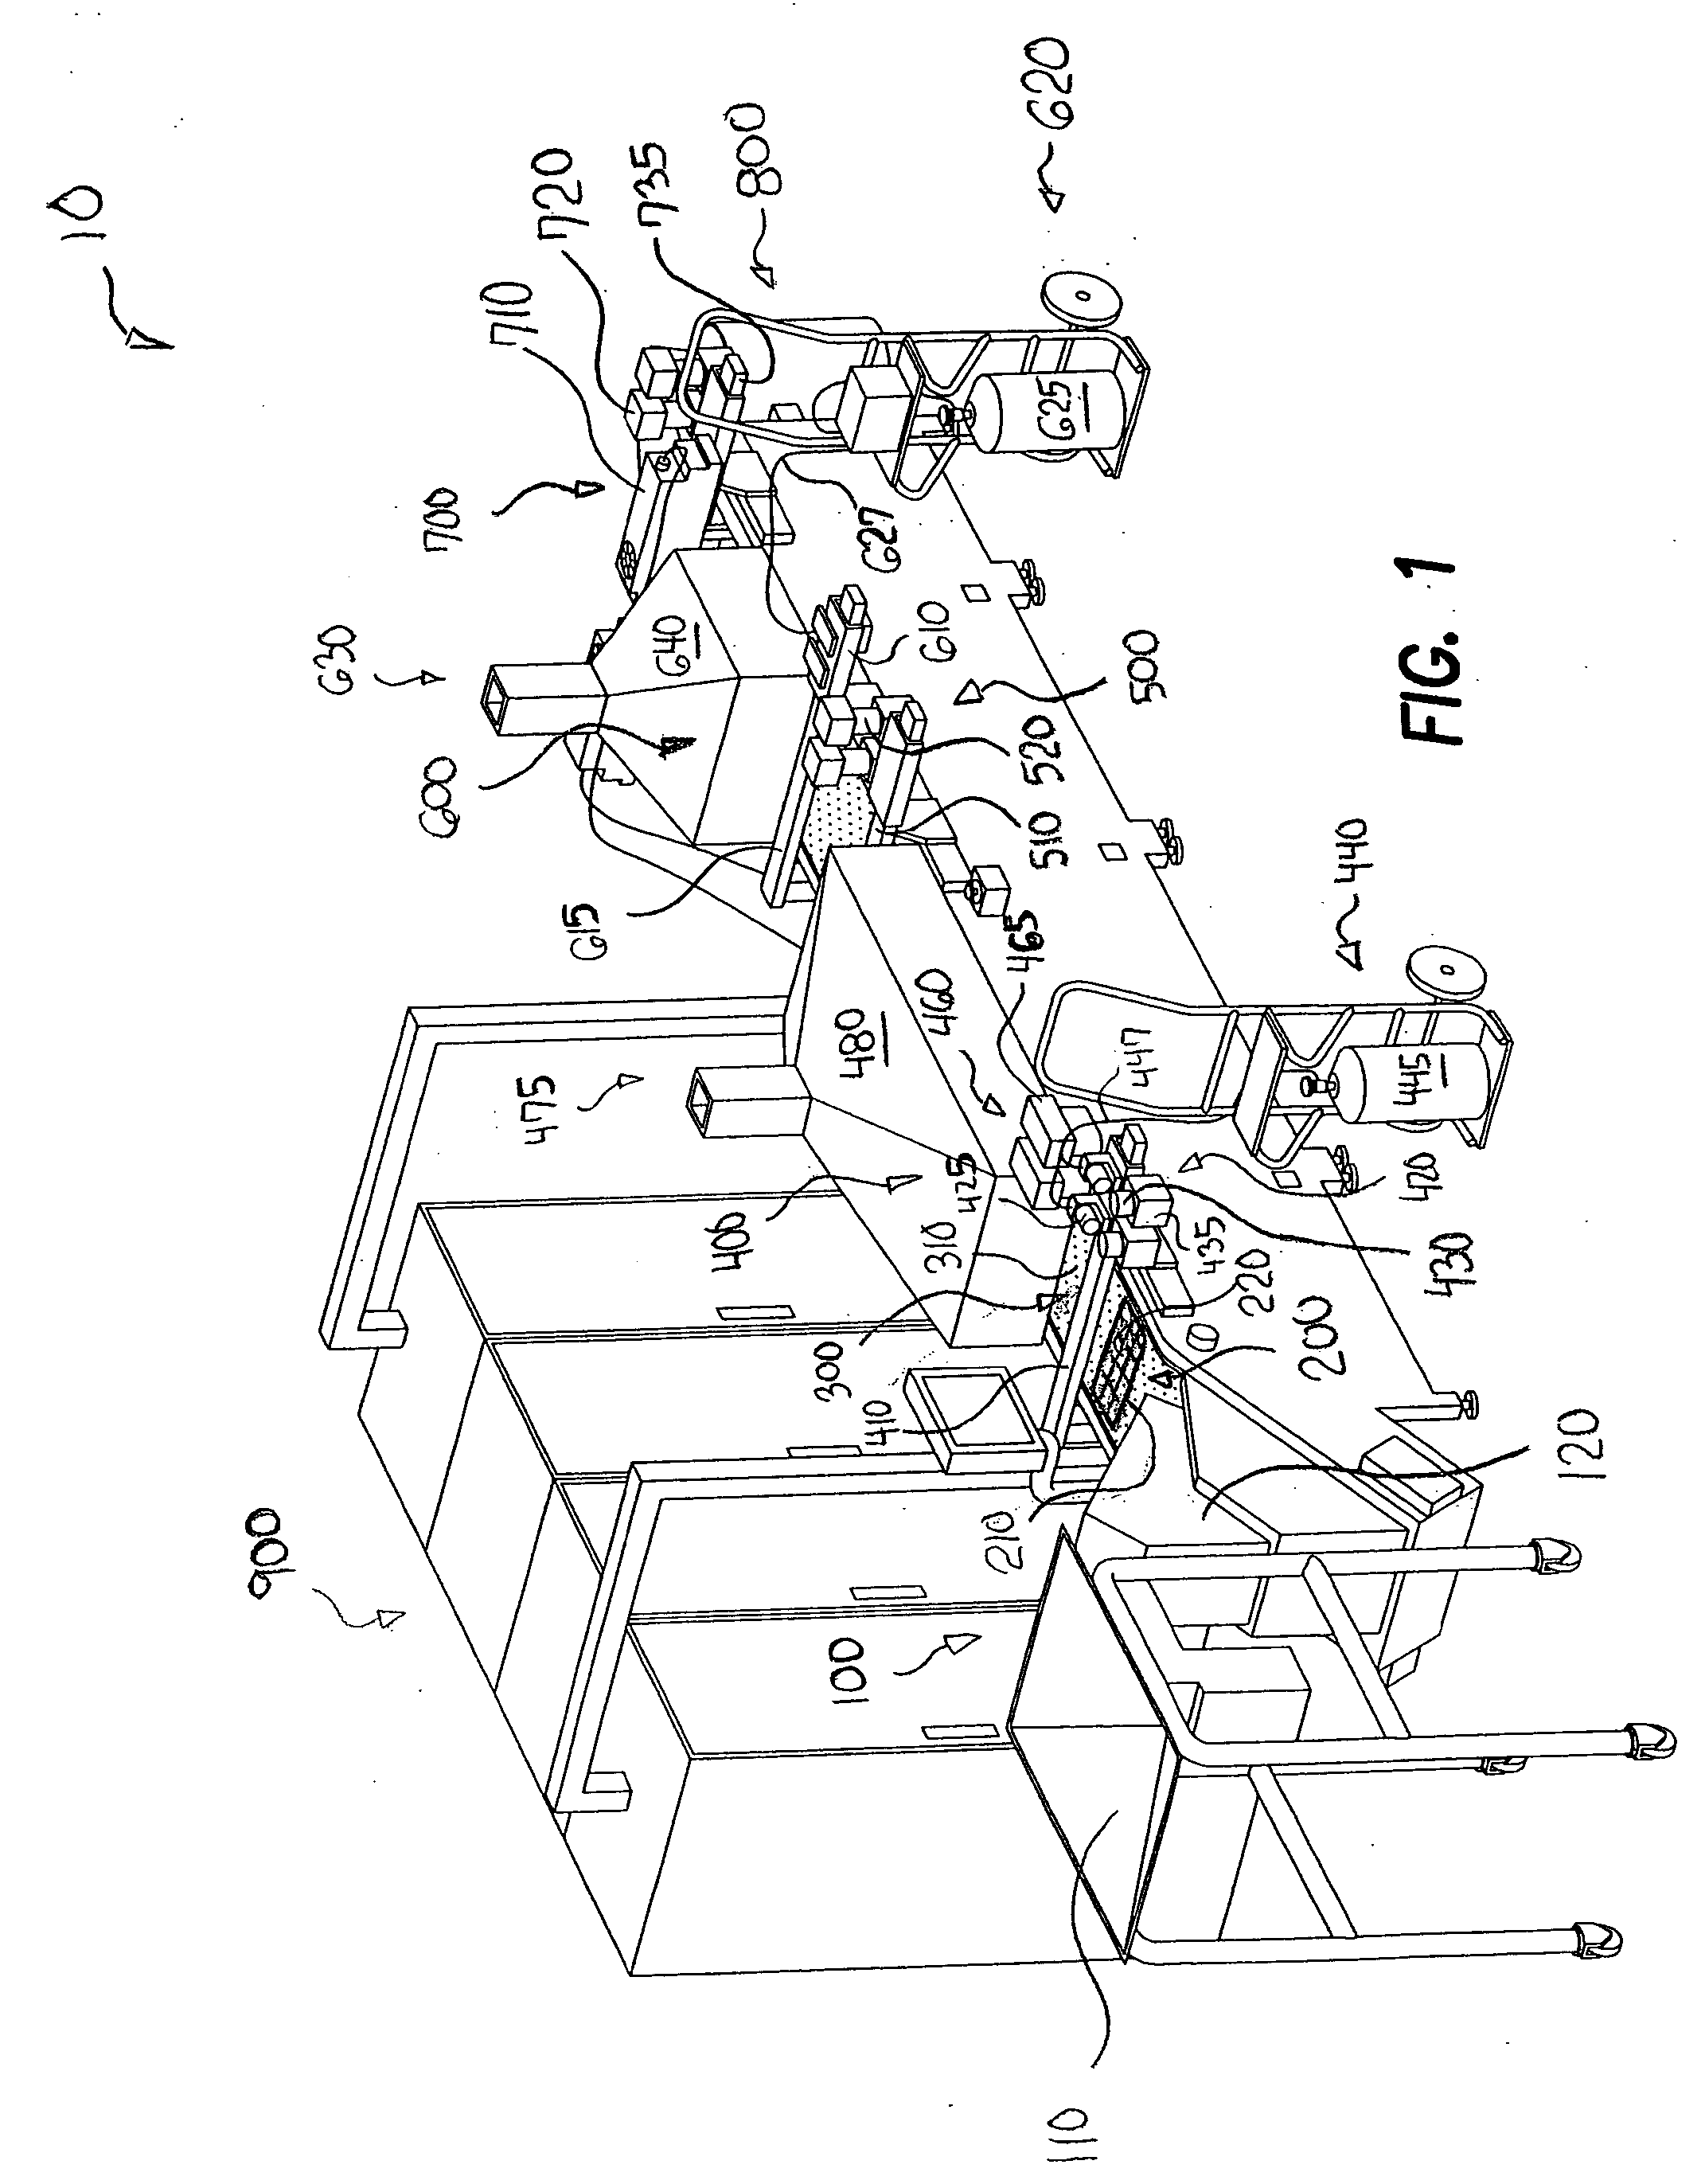 Apparatus and method for producing or processing a product or sample